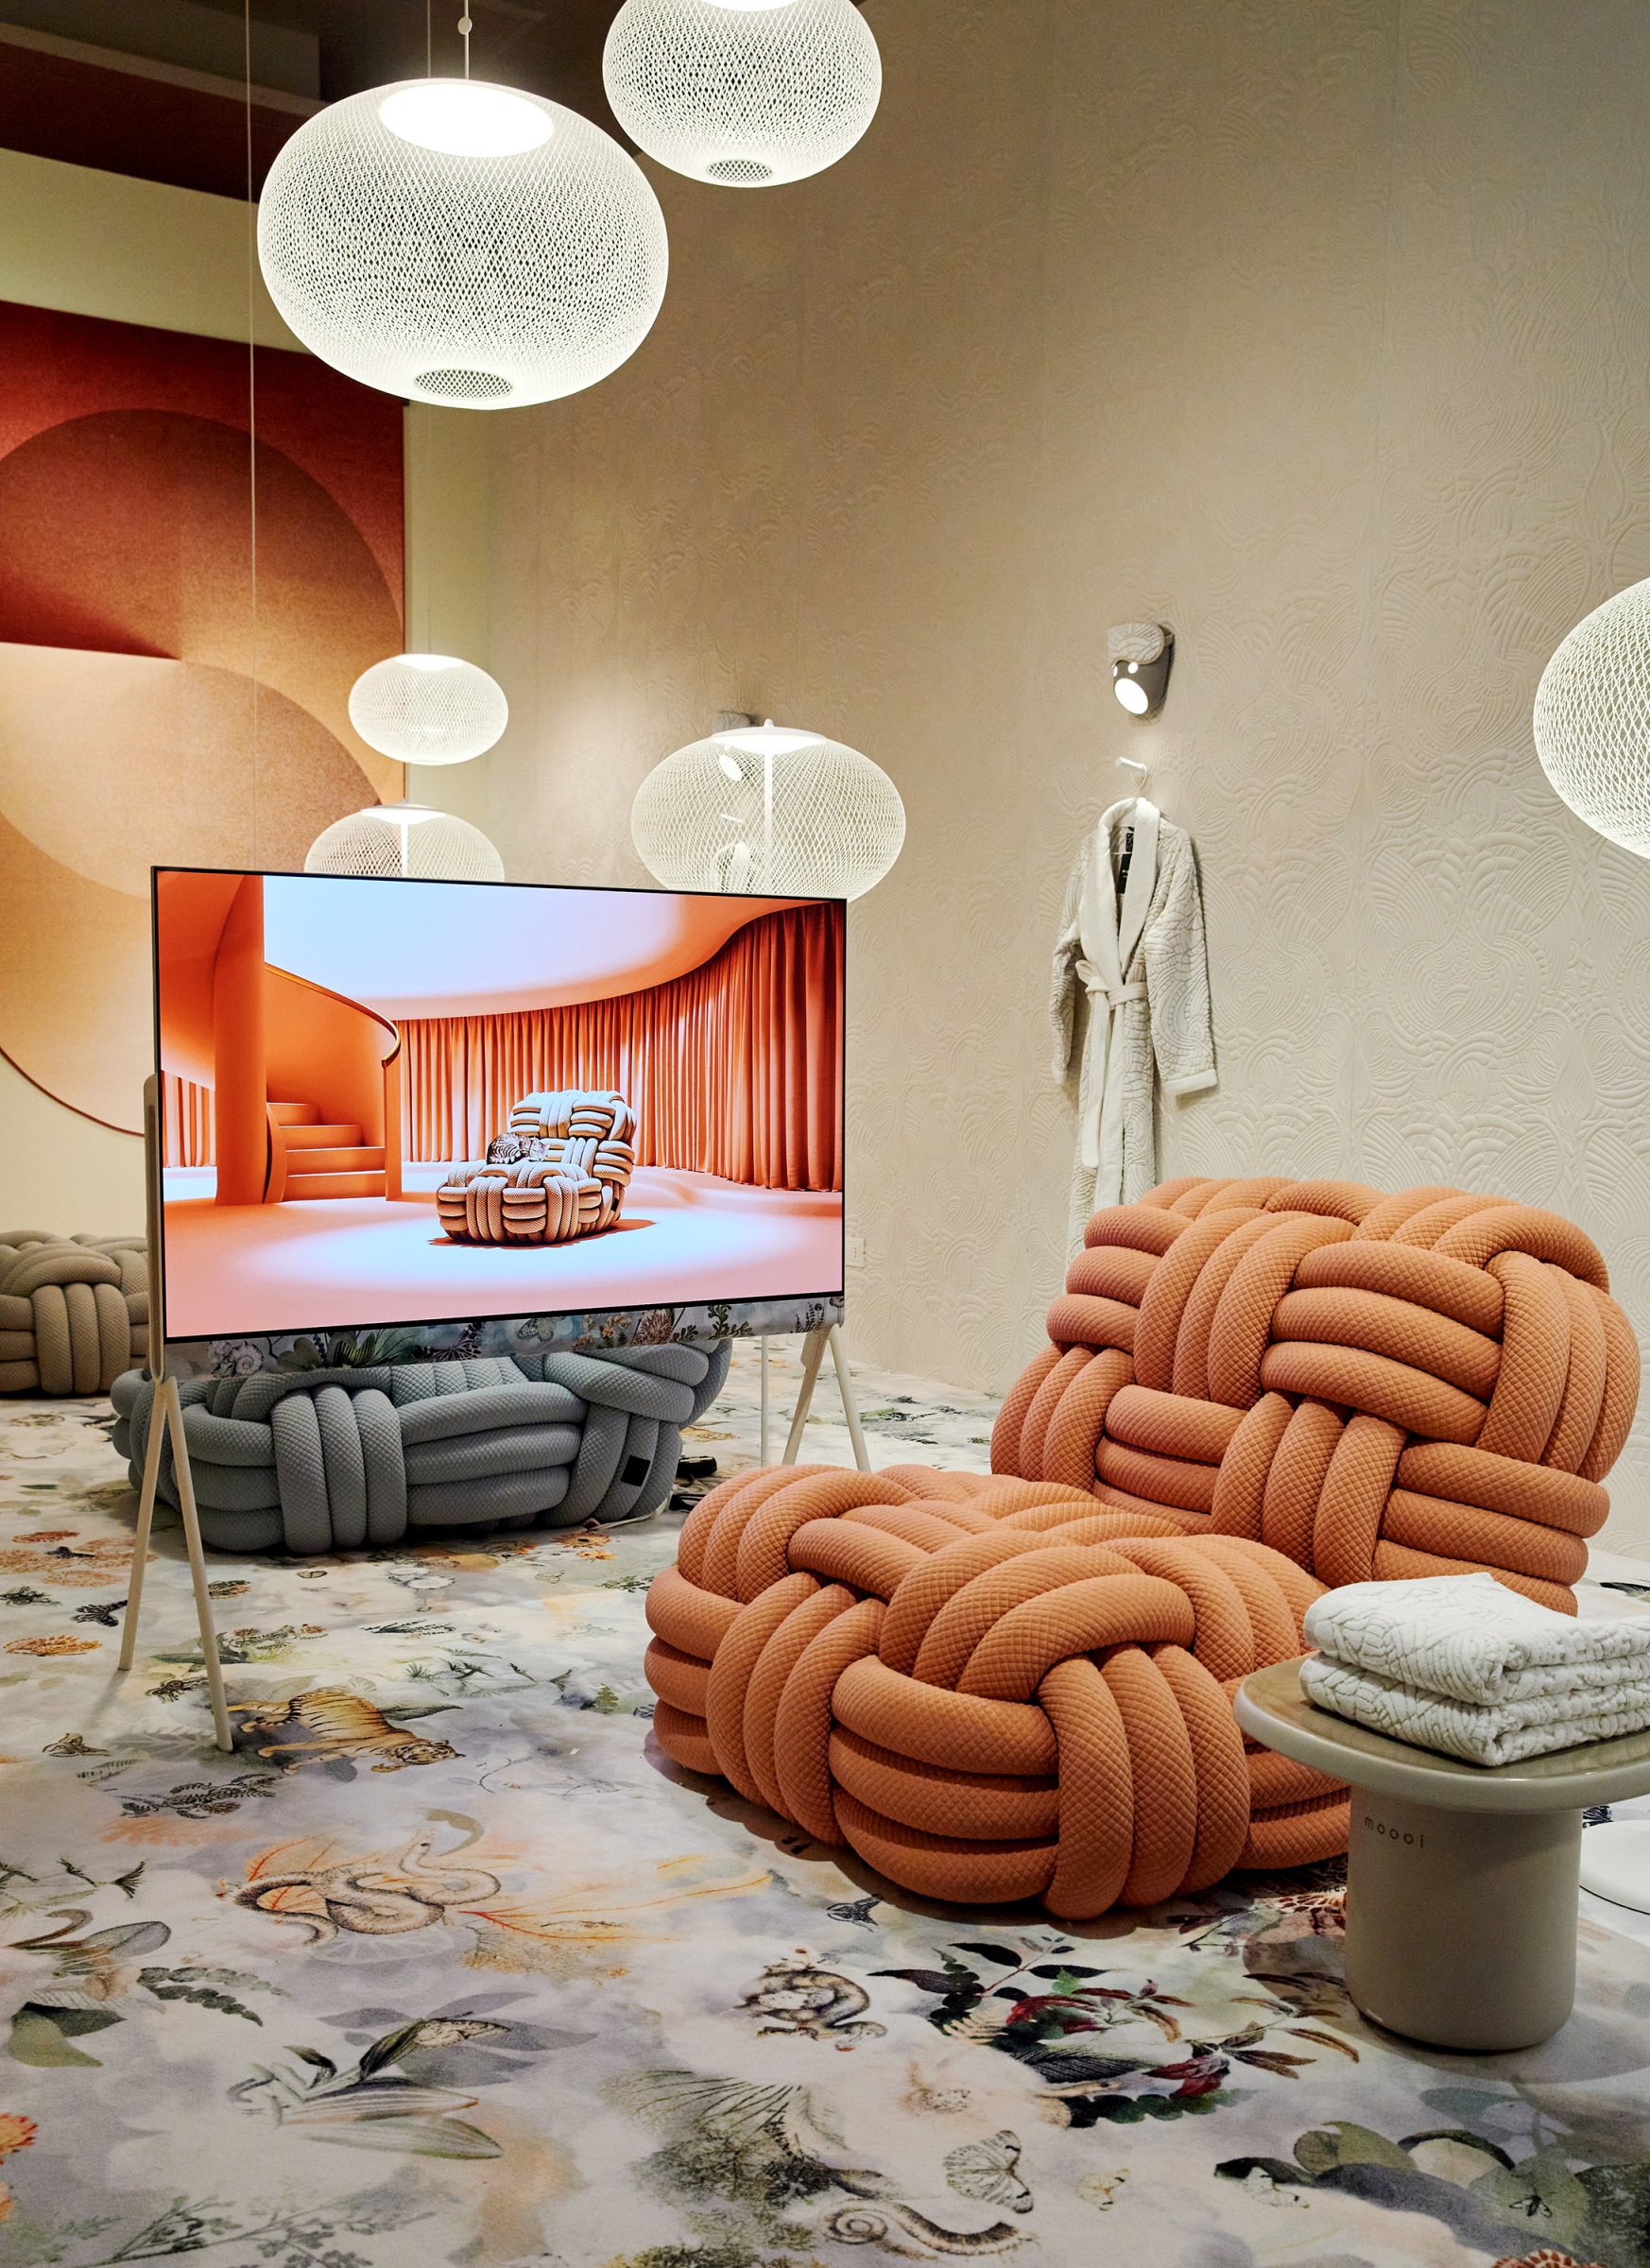 LG OLED Objet Collection Posé next to a stylish orange sofa in a space designed by Dutch brand Moooi